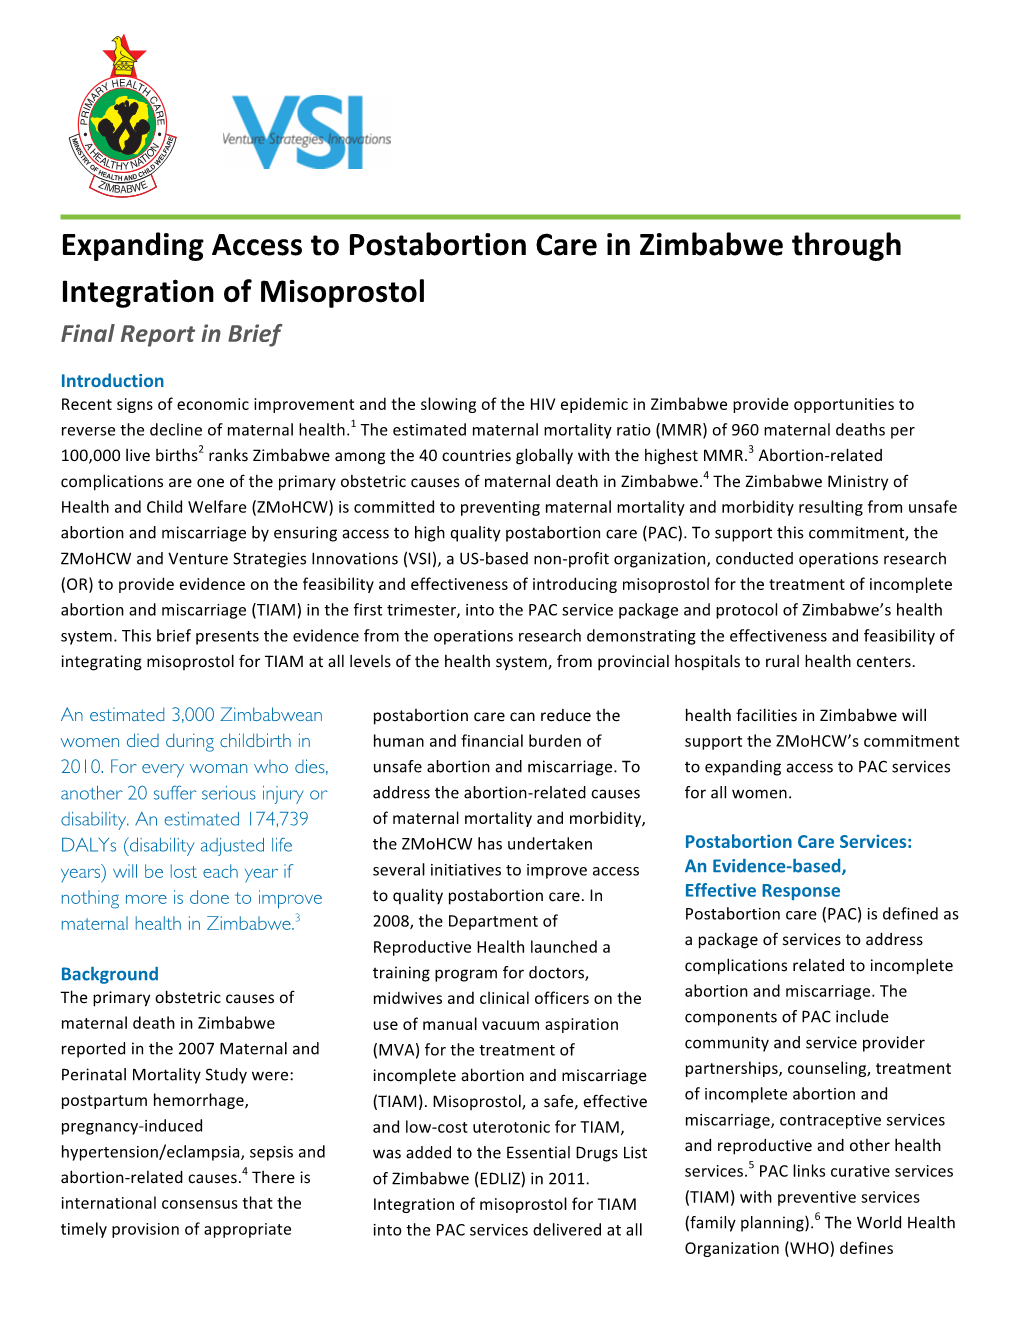 Expanding Access to Postabortion Care in Zimbabwe Through Integration of Misoprostol Final Report in Brief